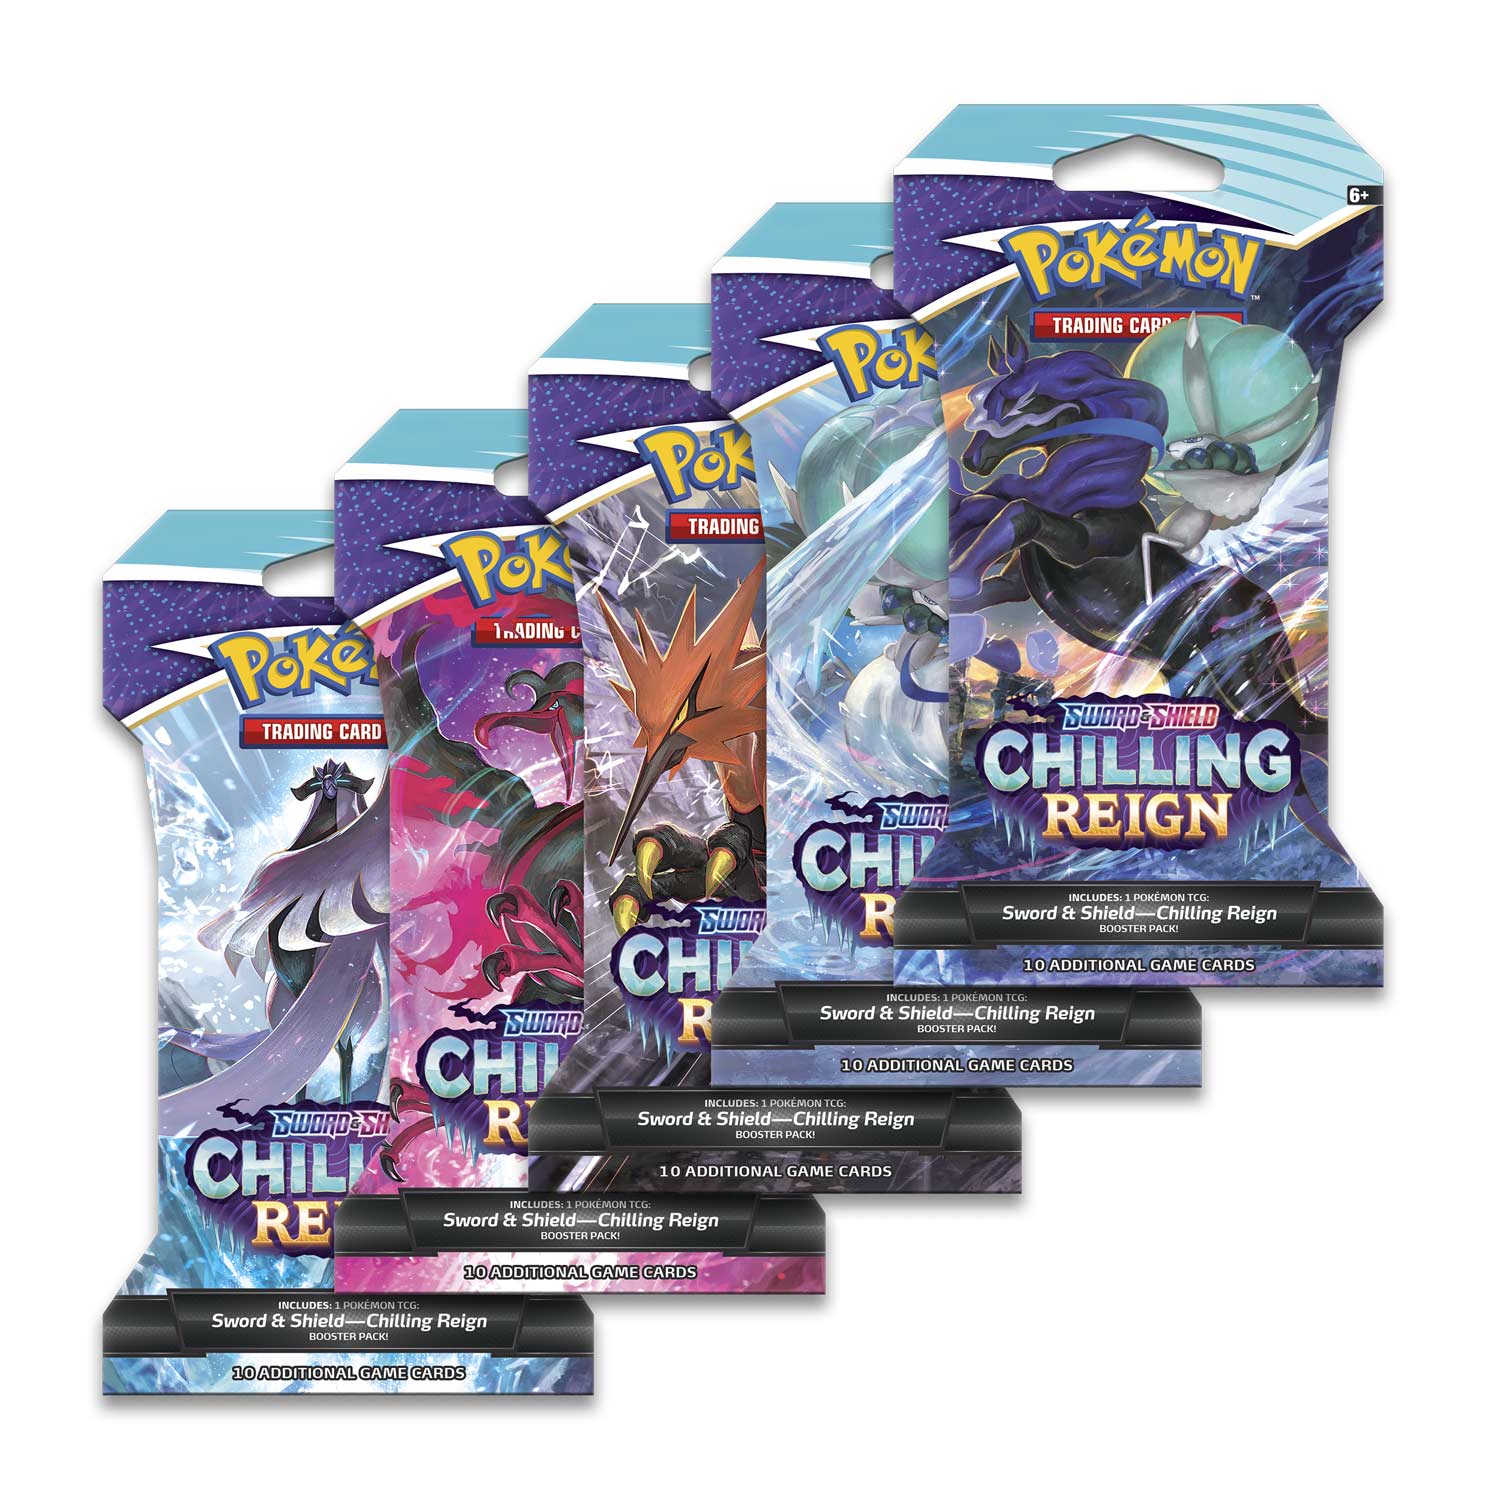 Sword & Shield: Chilling Reign - Sleeved Booster Pack